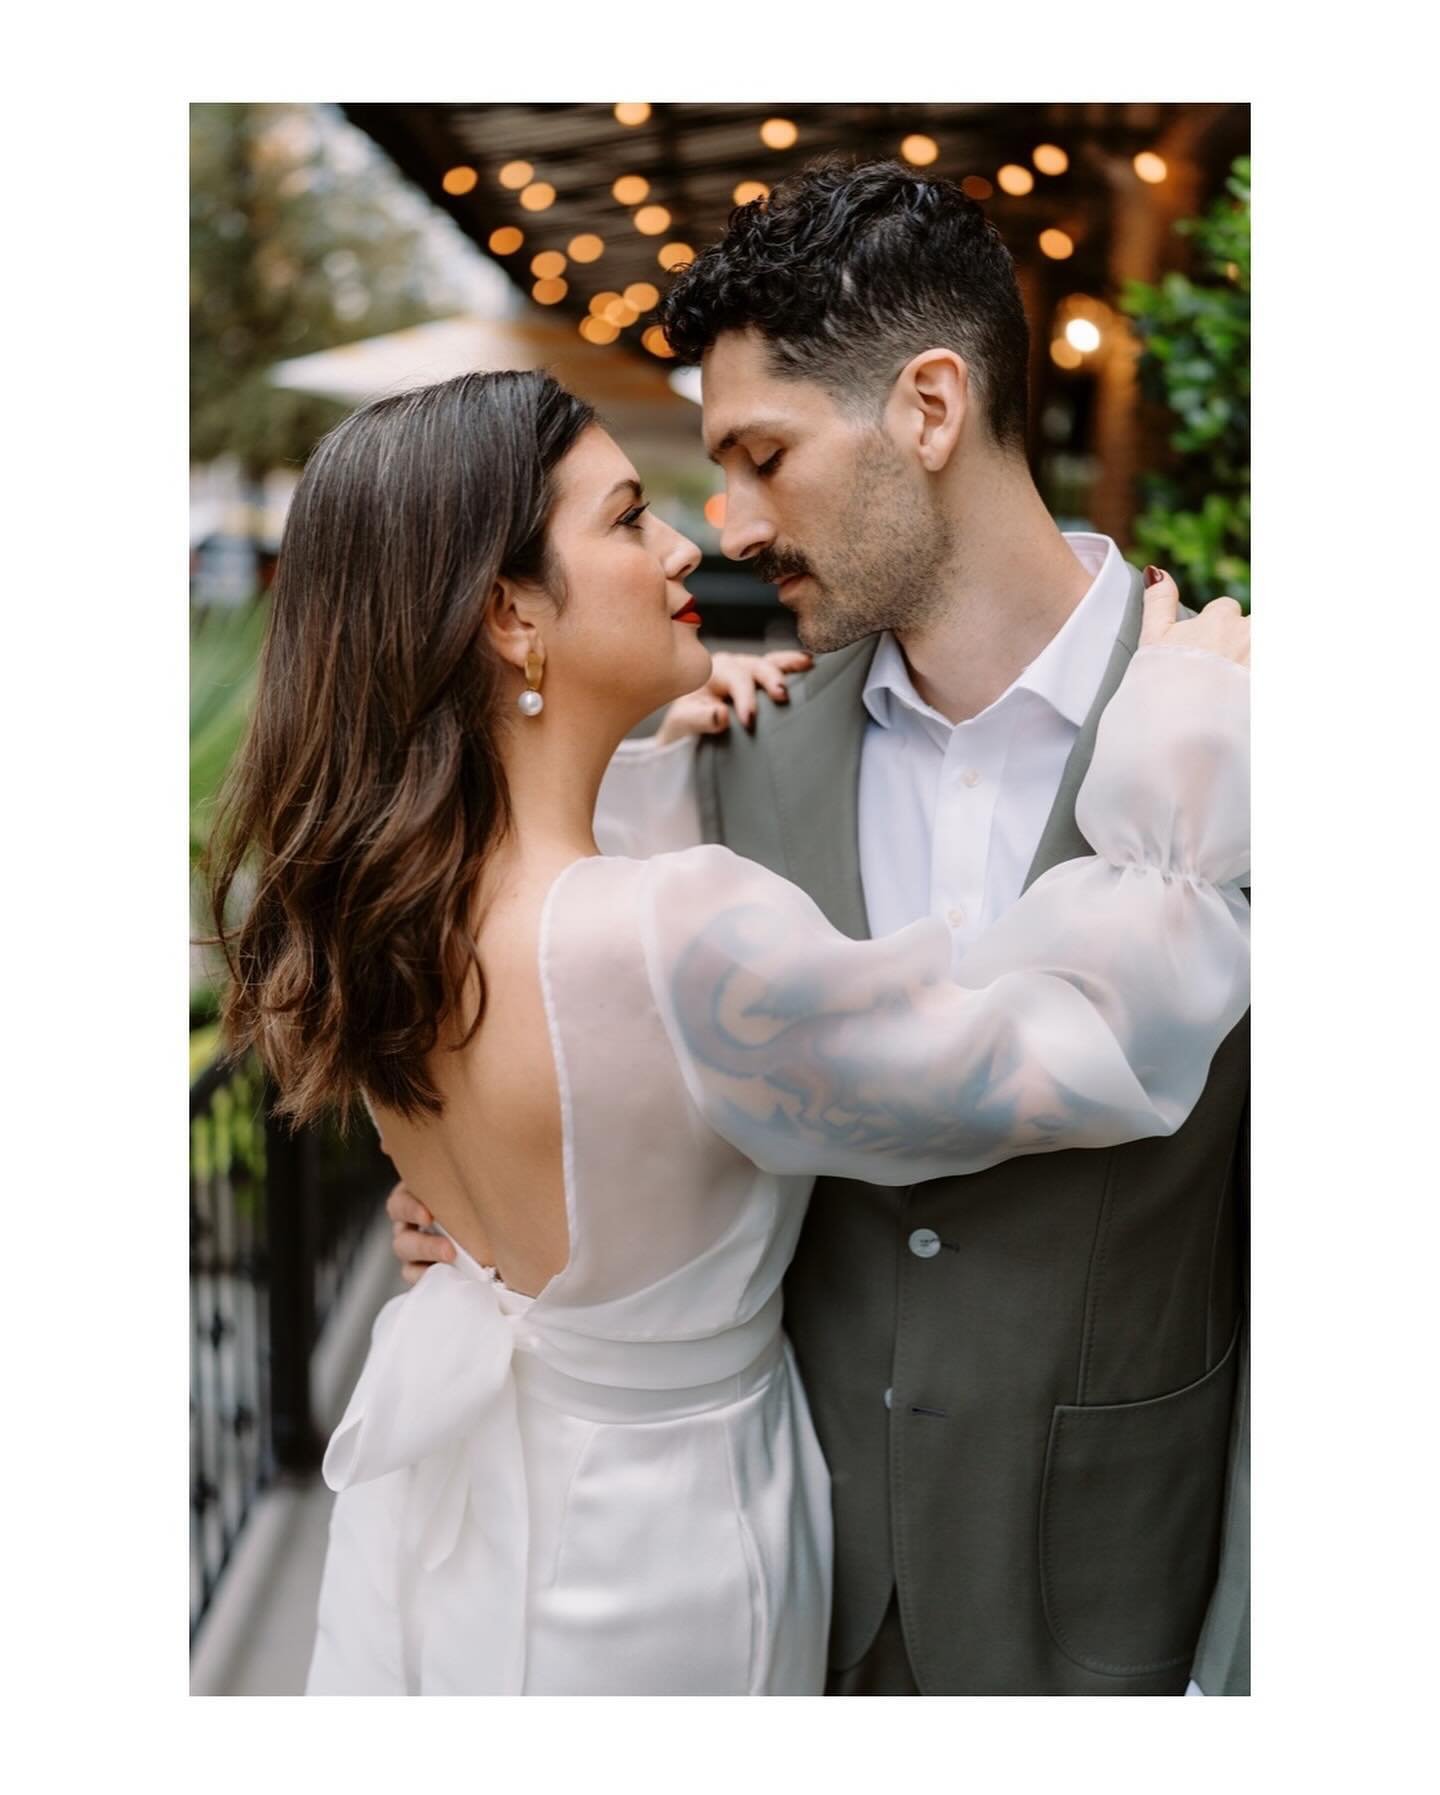 Marissa + Adrian 🌙  Apologies in advance to those who missed the magic of this wedding reception. It was incredible(Thanks you @djcassandra_)! Using one of the original courtrooms at the Travis County Court House was a rare gift. 
⁠
Planning: @weddi